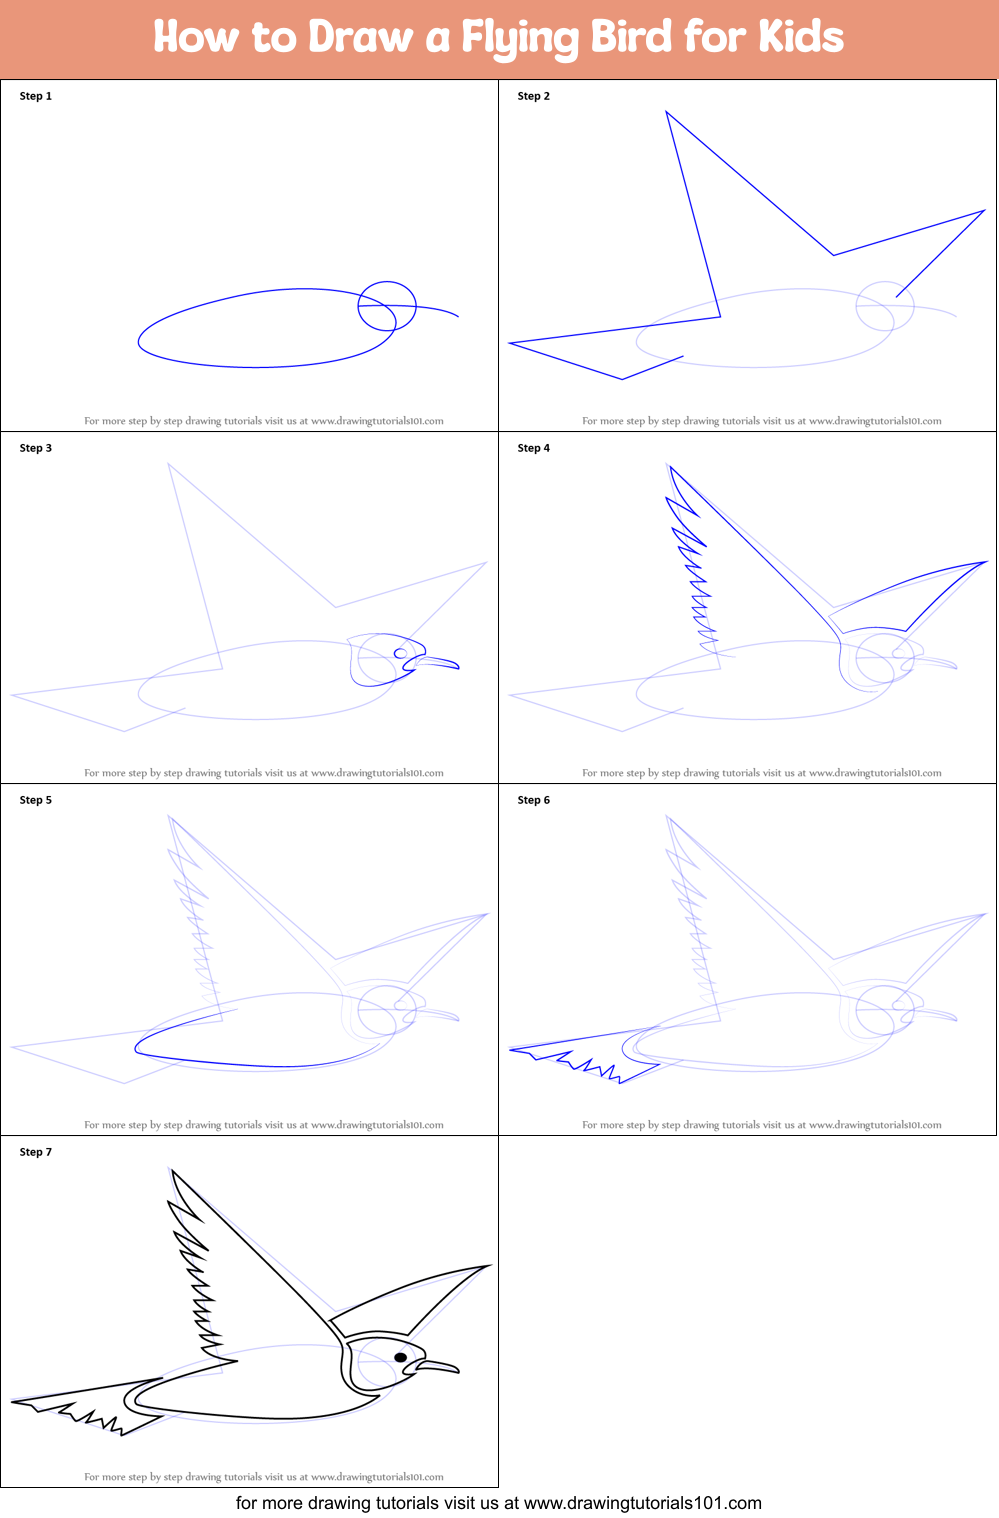 How to Draw a Flying Bird for Kids printable step by step drawing sheet